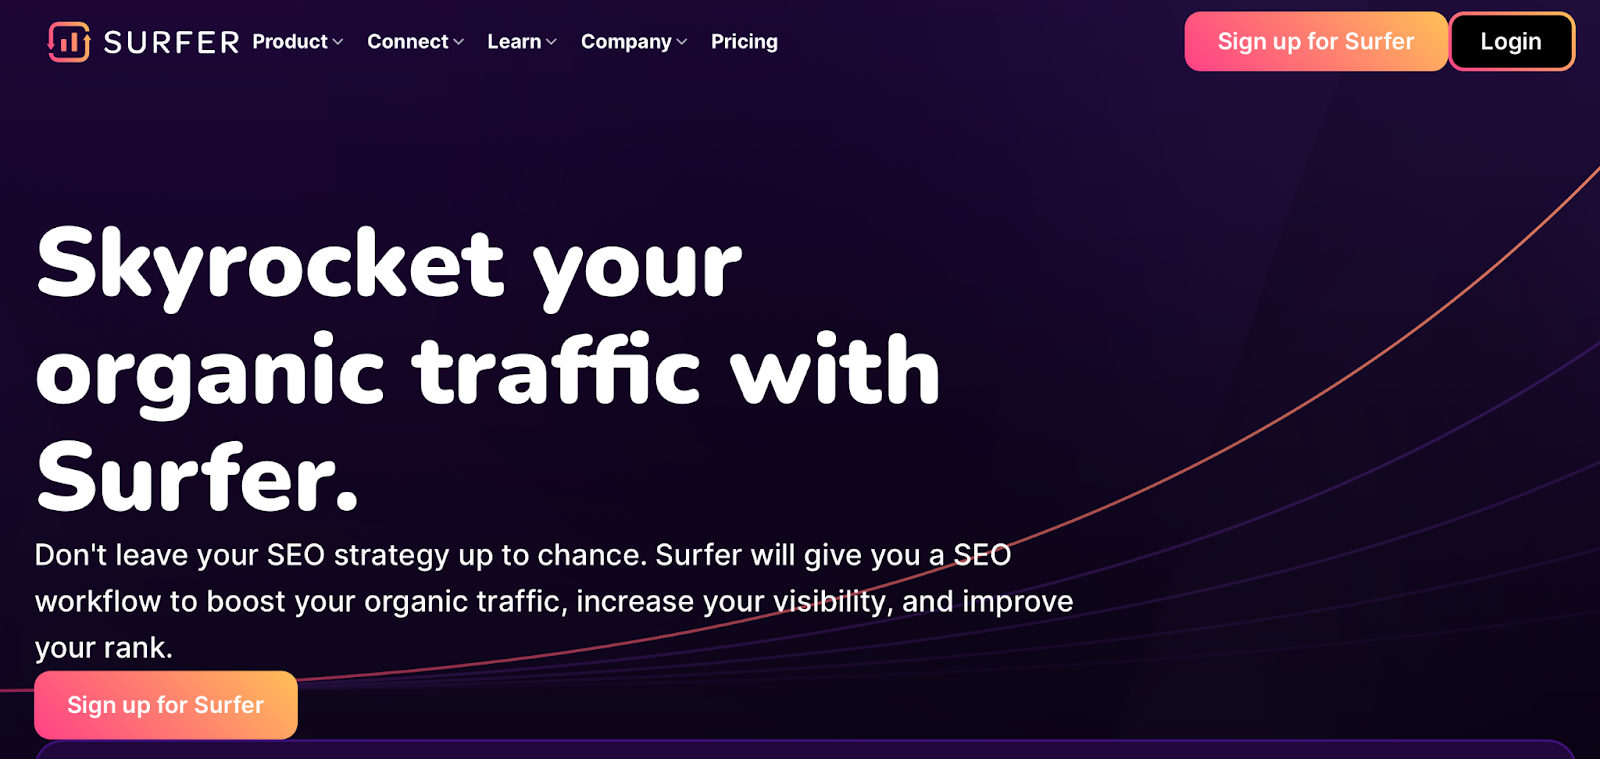 The image displays the Surfer SEO homepage with buttons to sign–up and a statement, “Skyrocket your organic traffic with Surfer.”